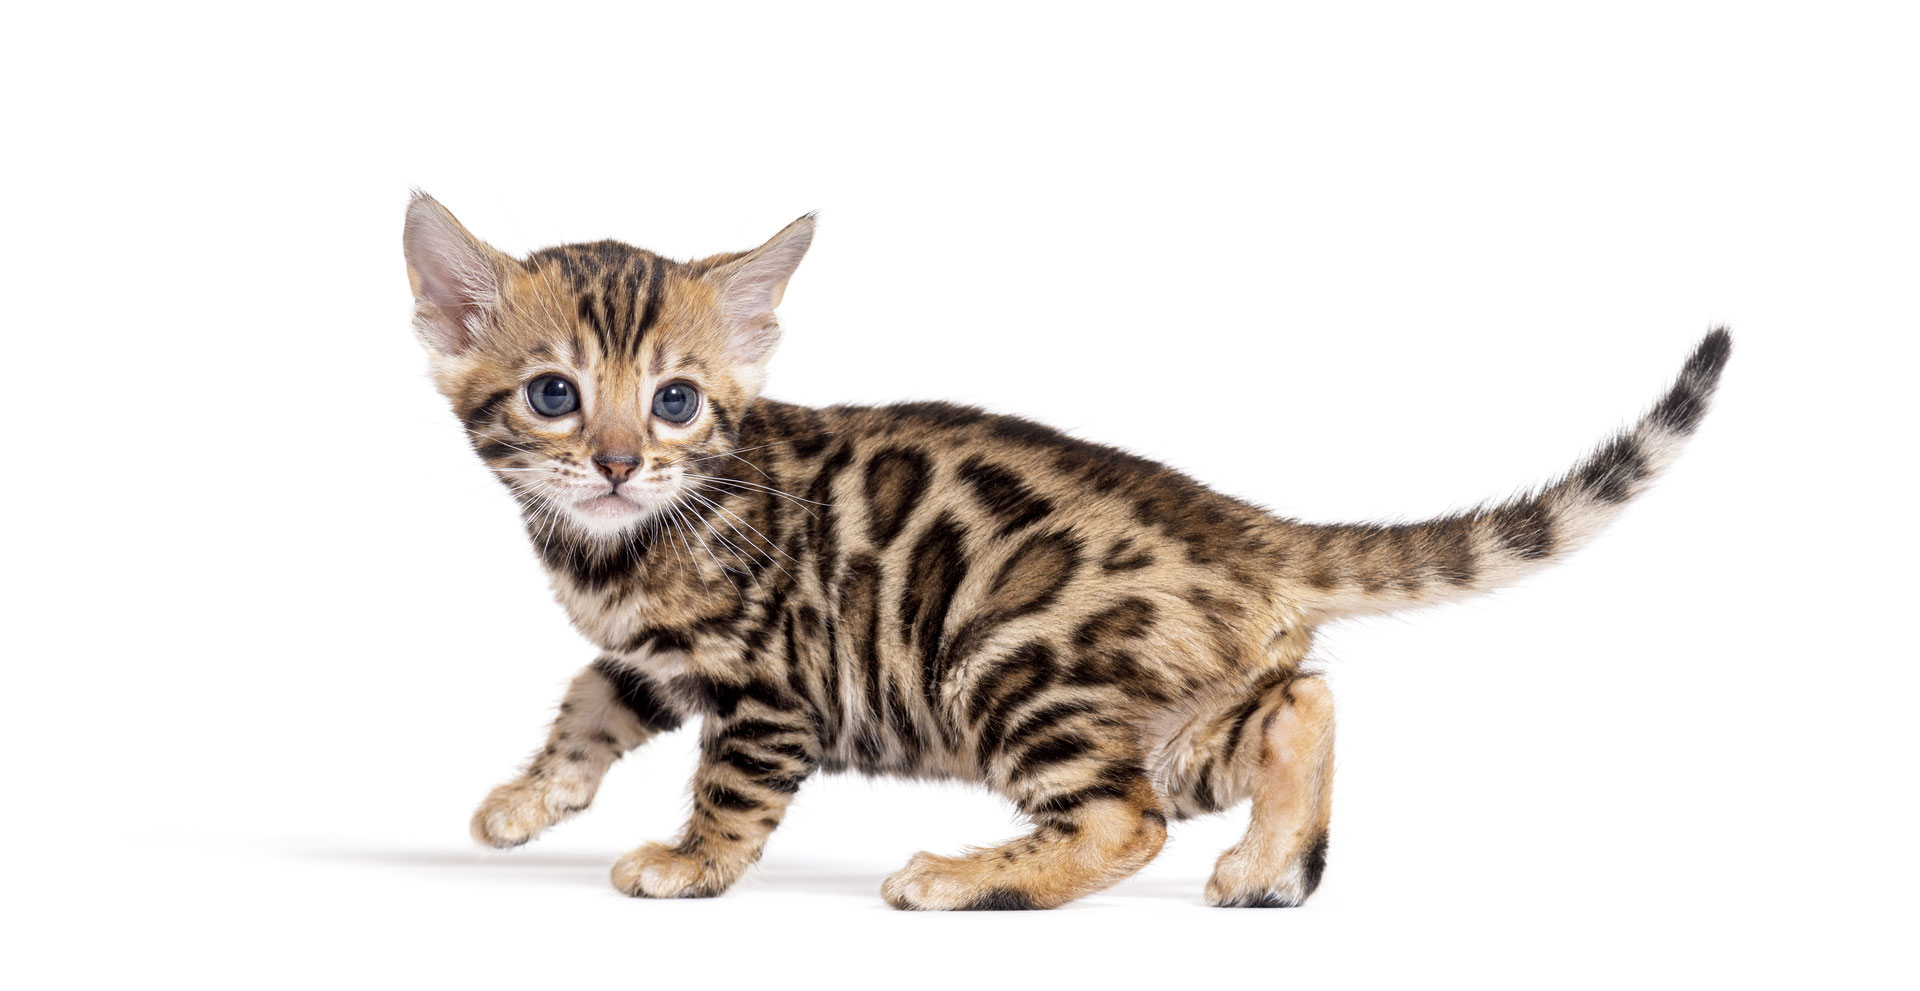 The Bengal cat is a stunning and energetic breed known for its striking appearance, wild-like markings, and playful personality.